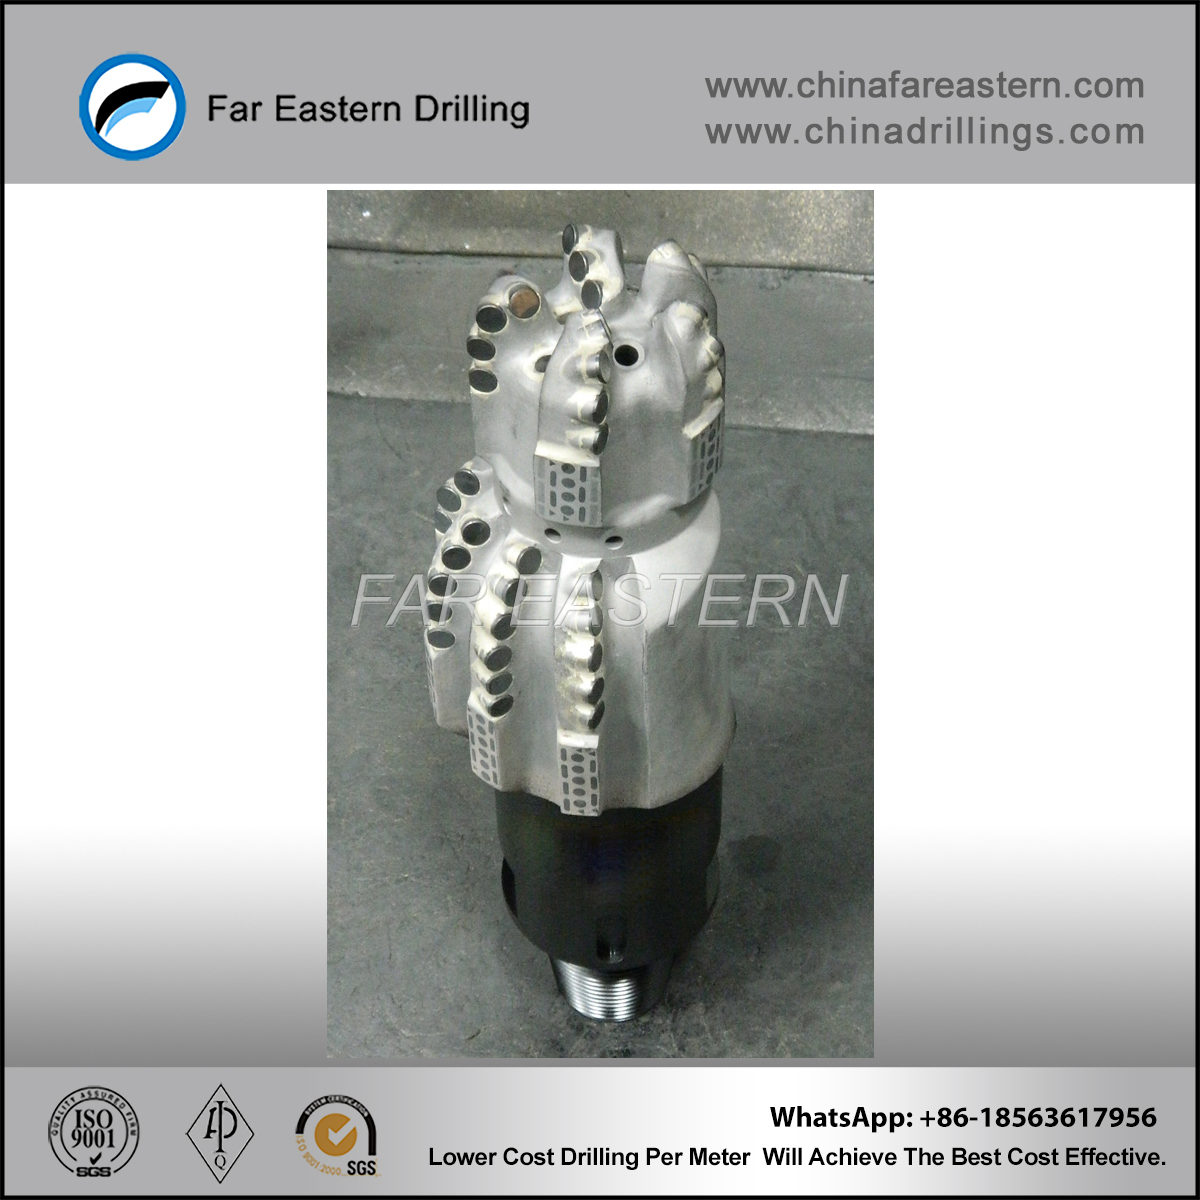 API factory of PDC bi center drilling bit for oil well and completion